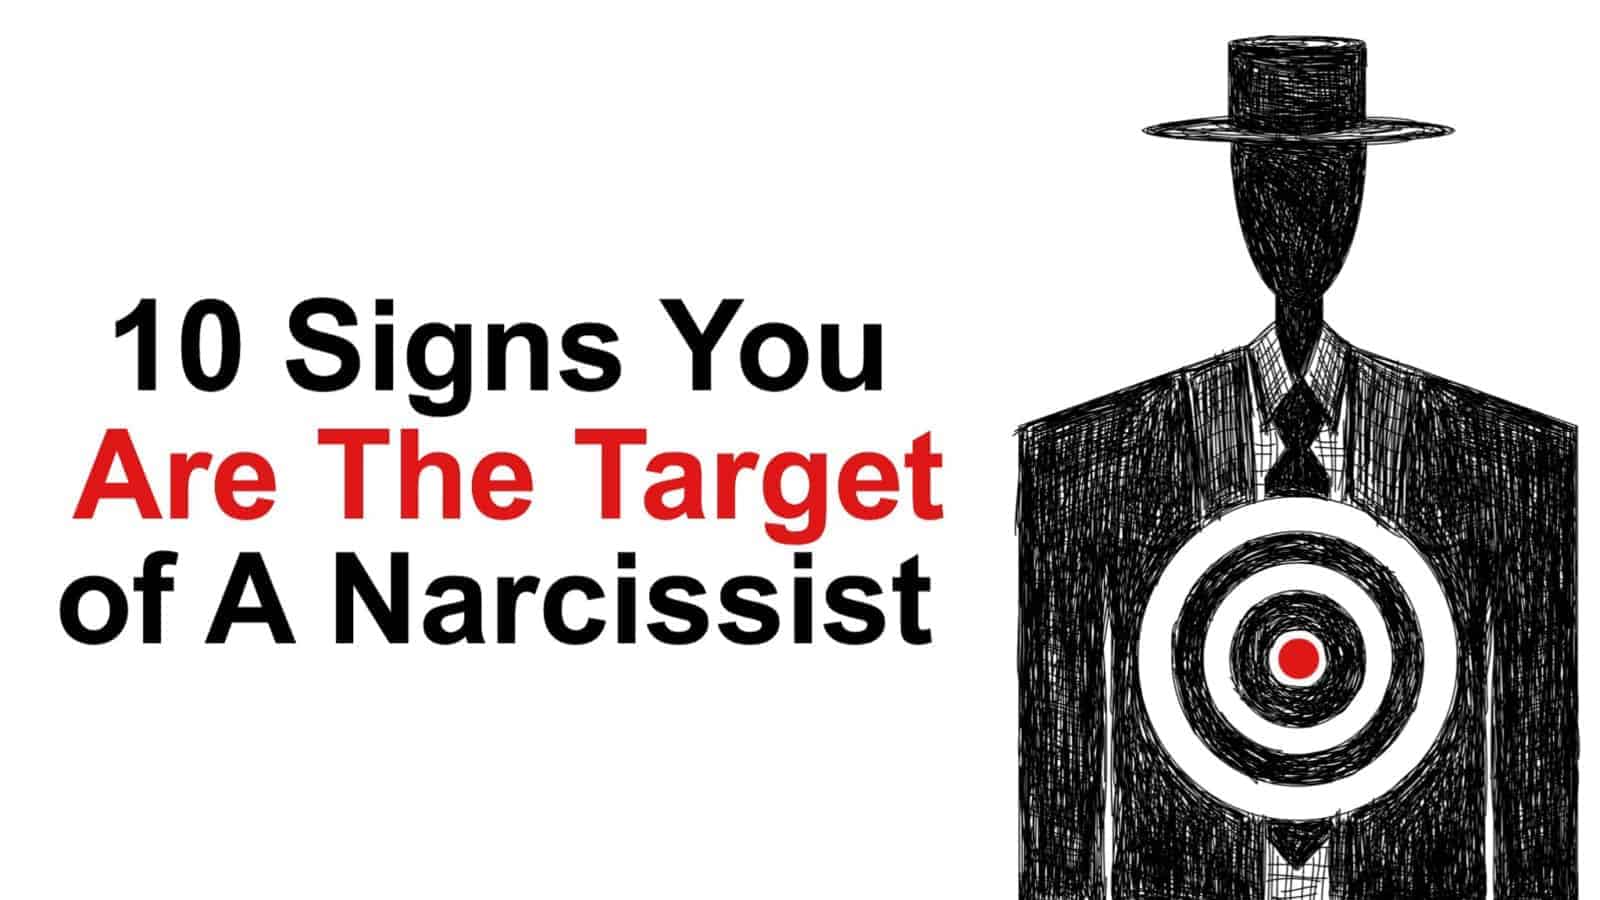 10 Signs You Are The Target of A Narcissist